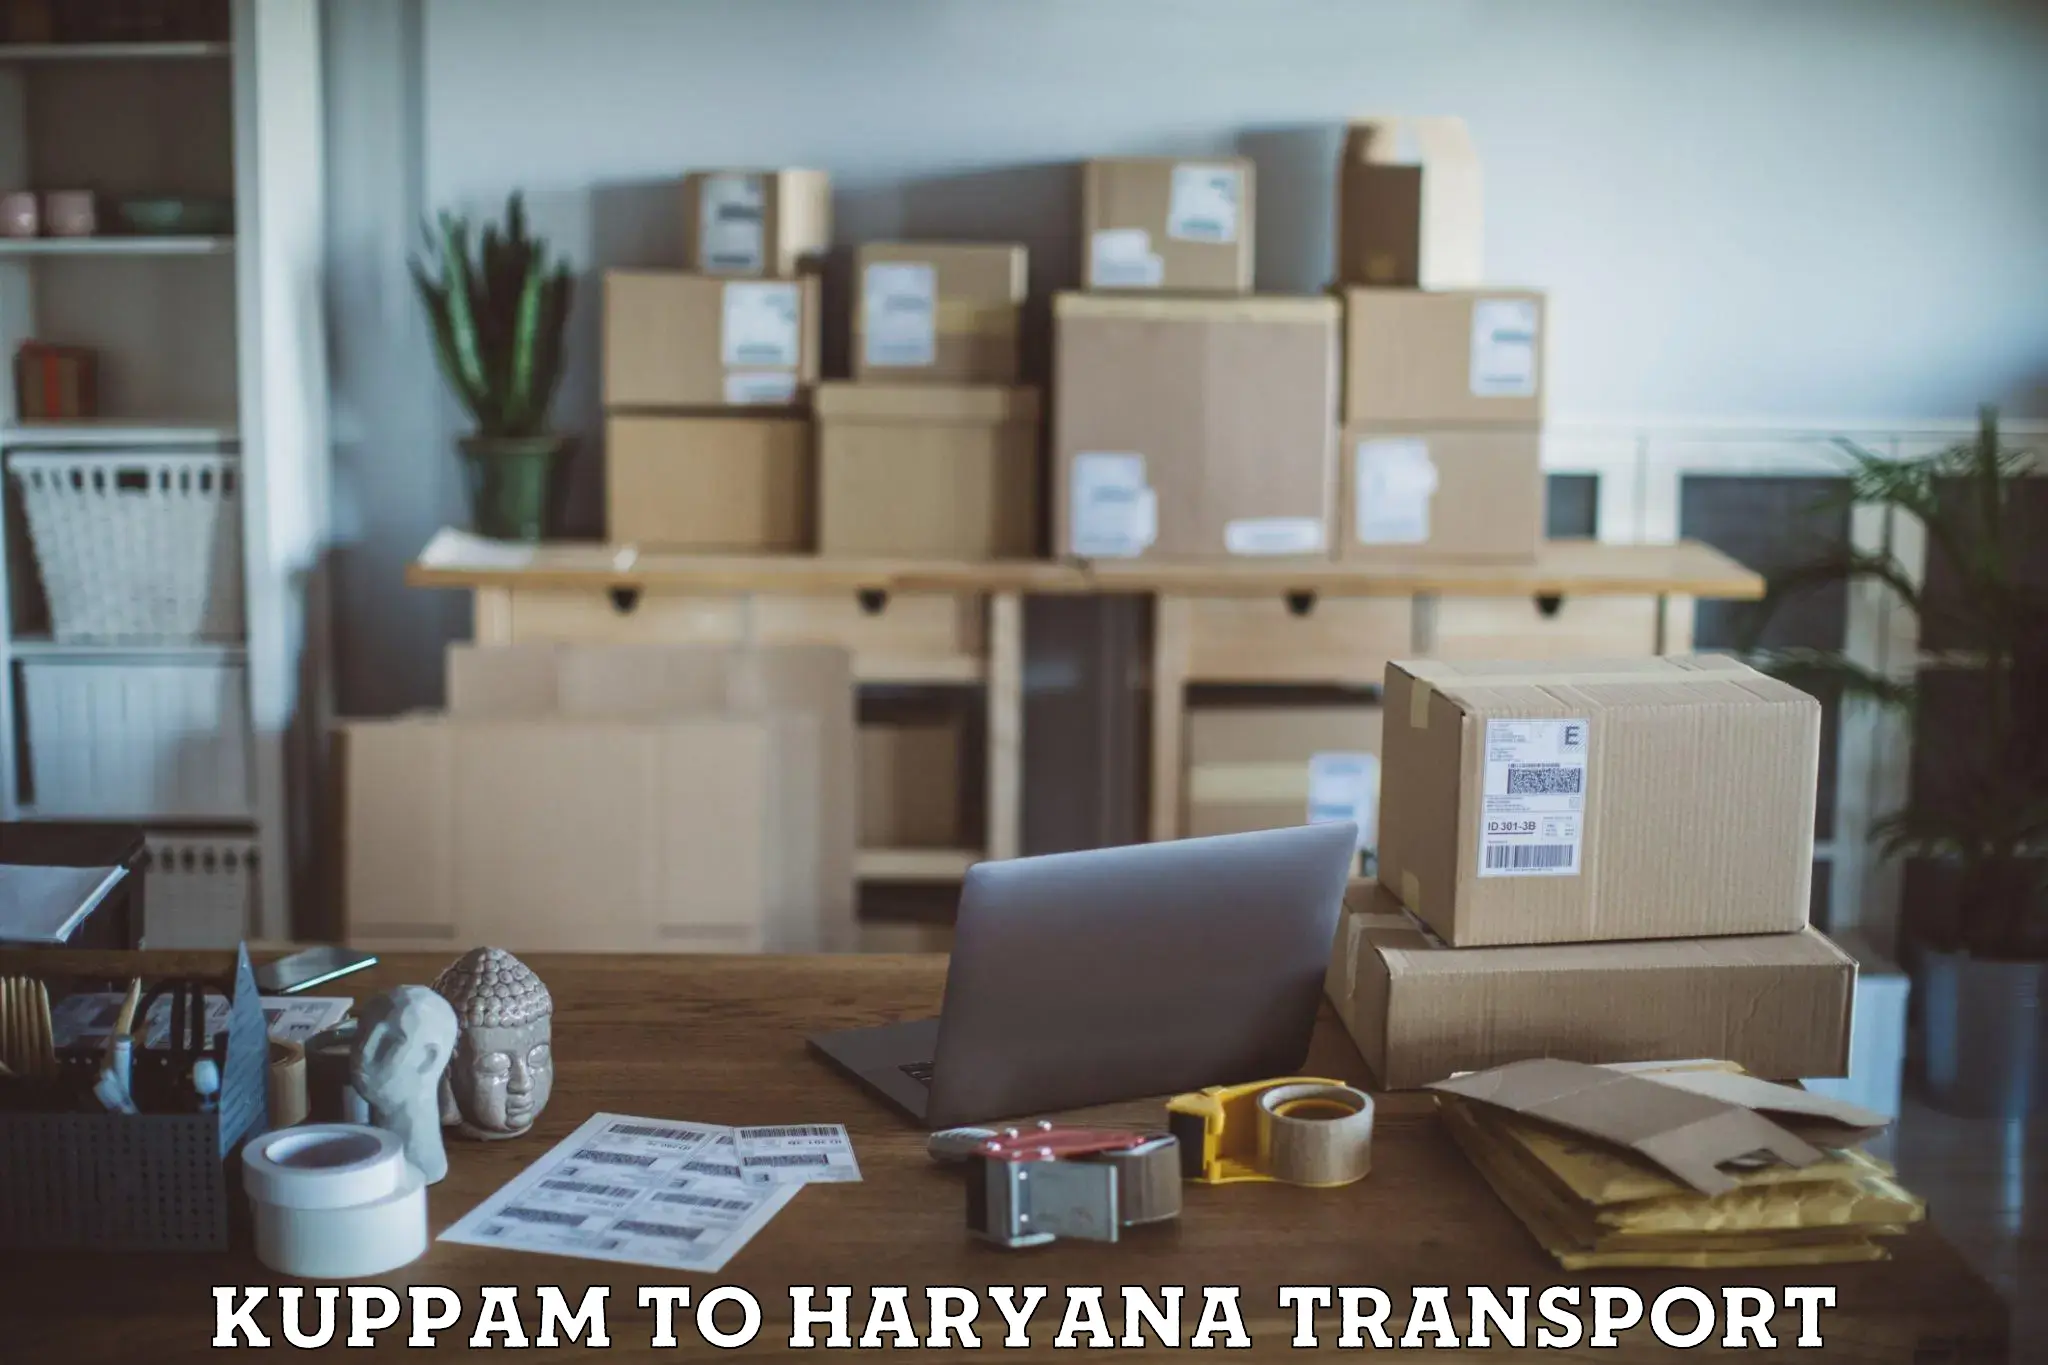 Cargo transport services in Kuppam to NCR Haryana